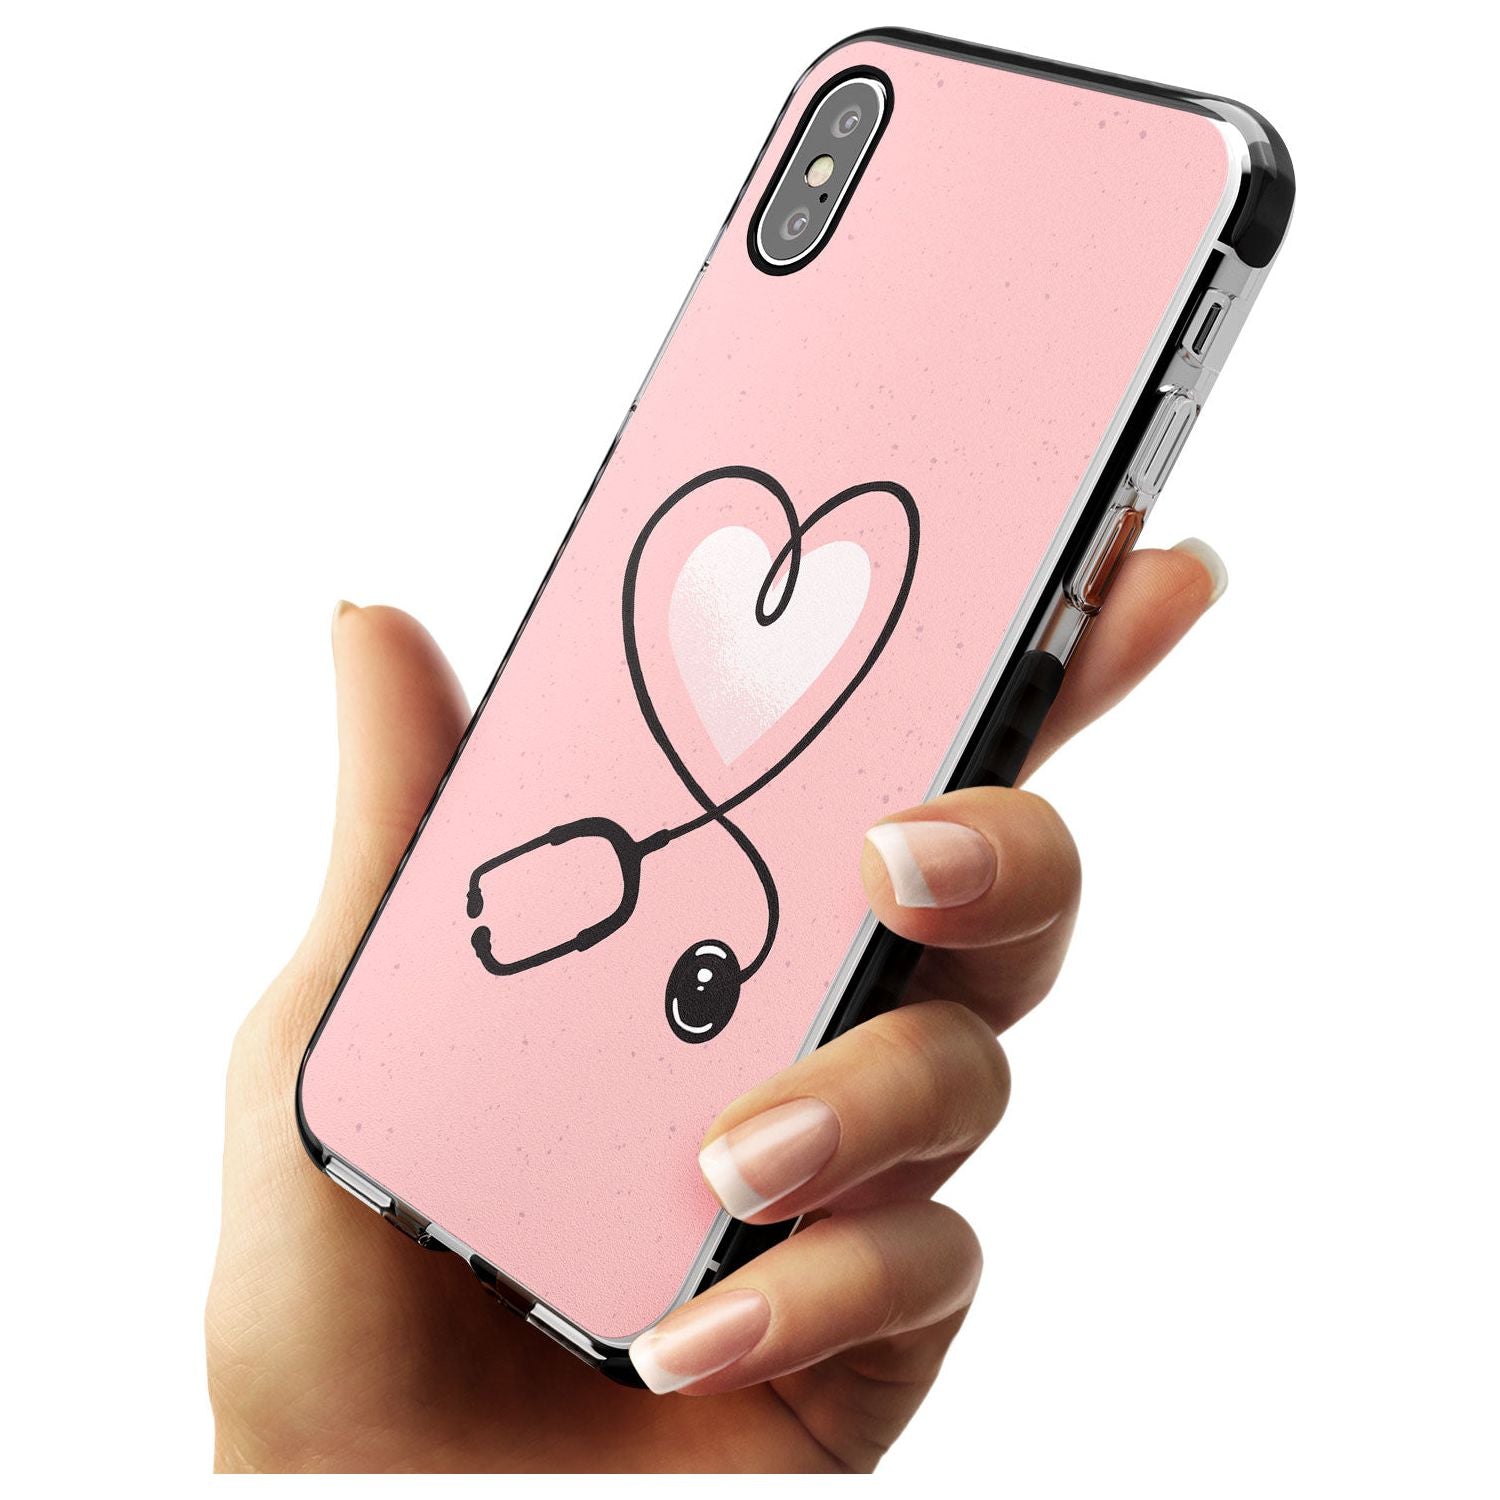 Medical Inspired Design Stethoscope Heart Black Impact Phone Case for iPhone X XS Max XR